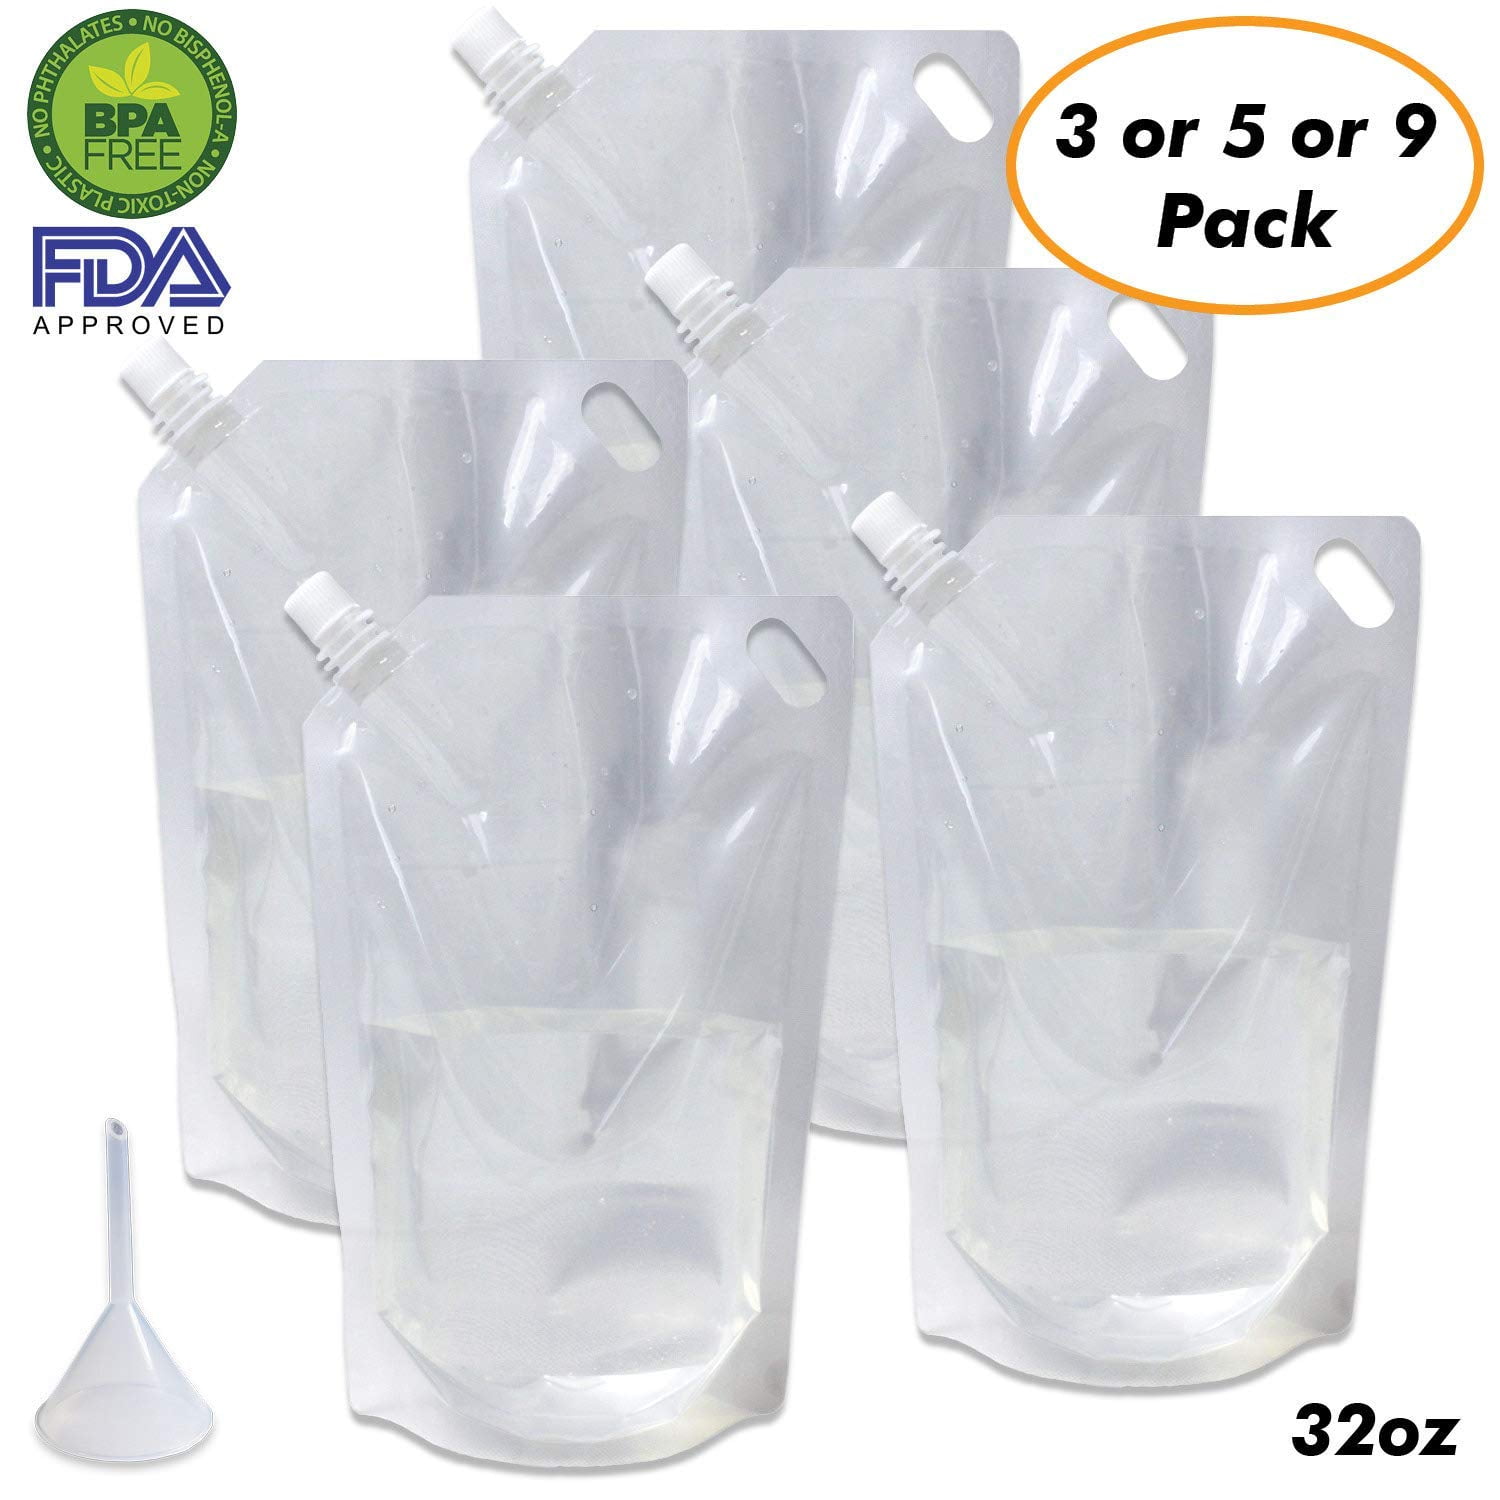 1 funnel Cruise Liquor Flask Kit For Travel,Concealable And Reusable Rum Runner Alcohol Juice Travel Plastic Liquor Bags For Sneak Drink 5 x 8 oz 005 FlaskKit